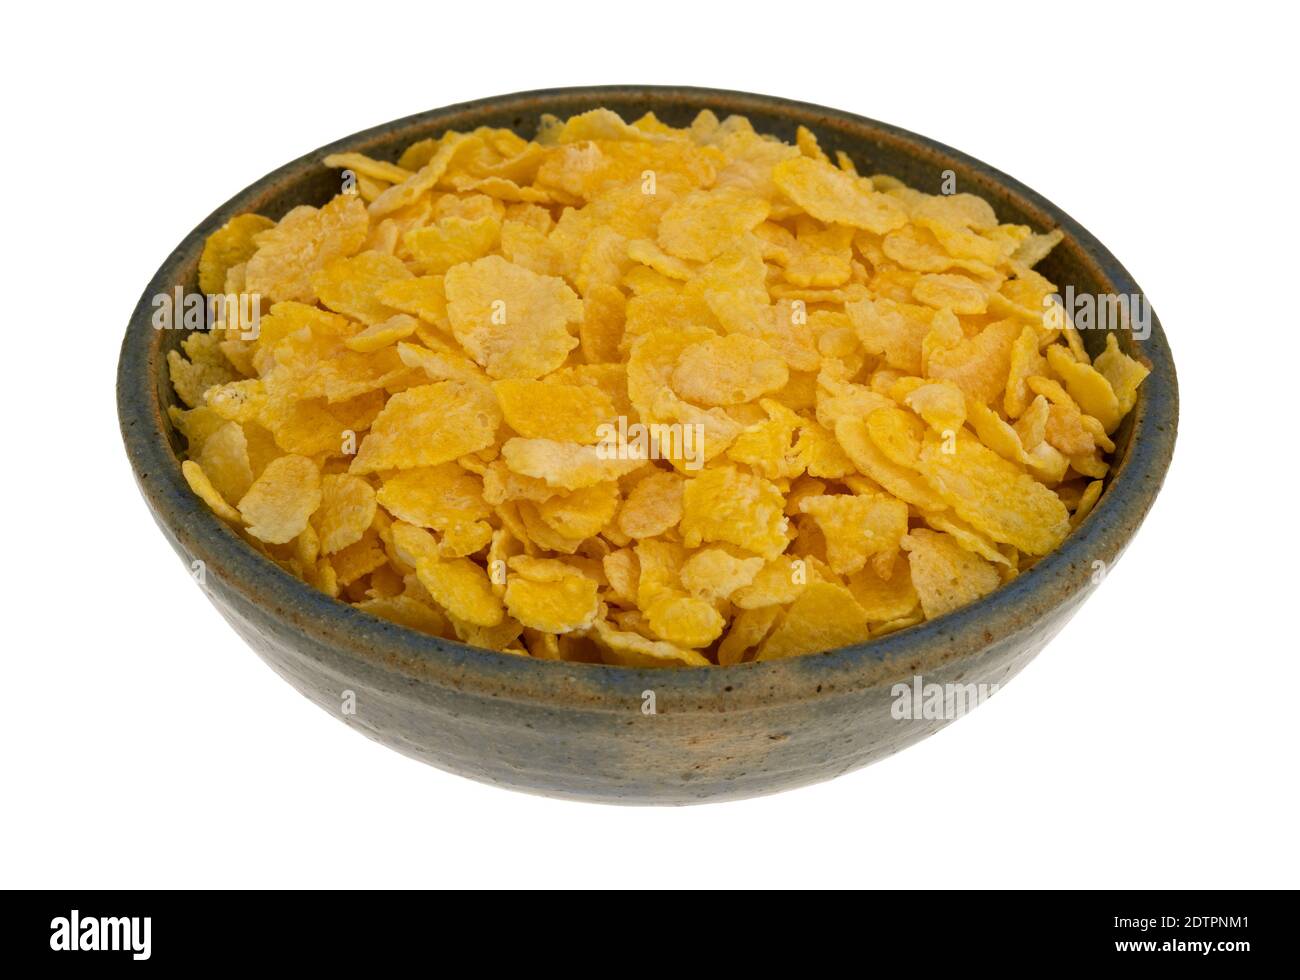 Side view of a bowl of dry toasted corn cereal isolated on a white background. Stock Photo